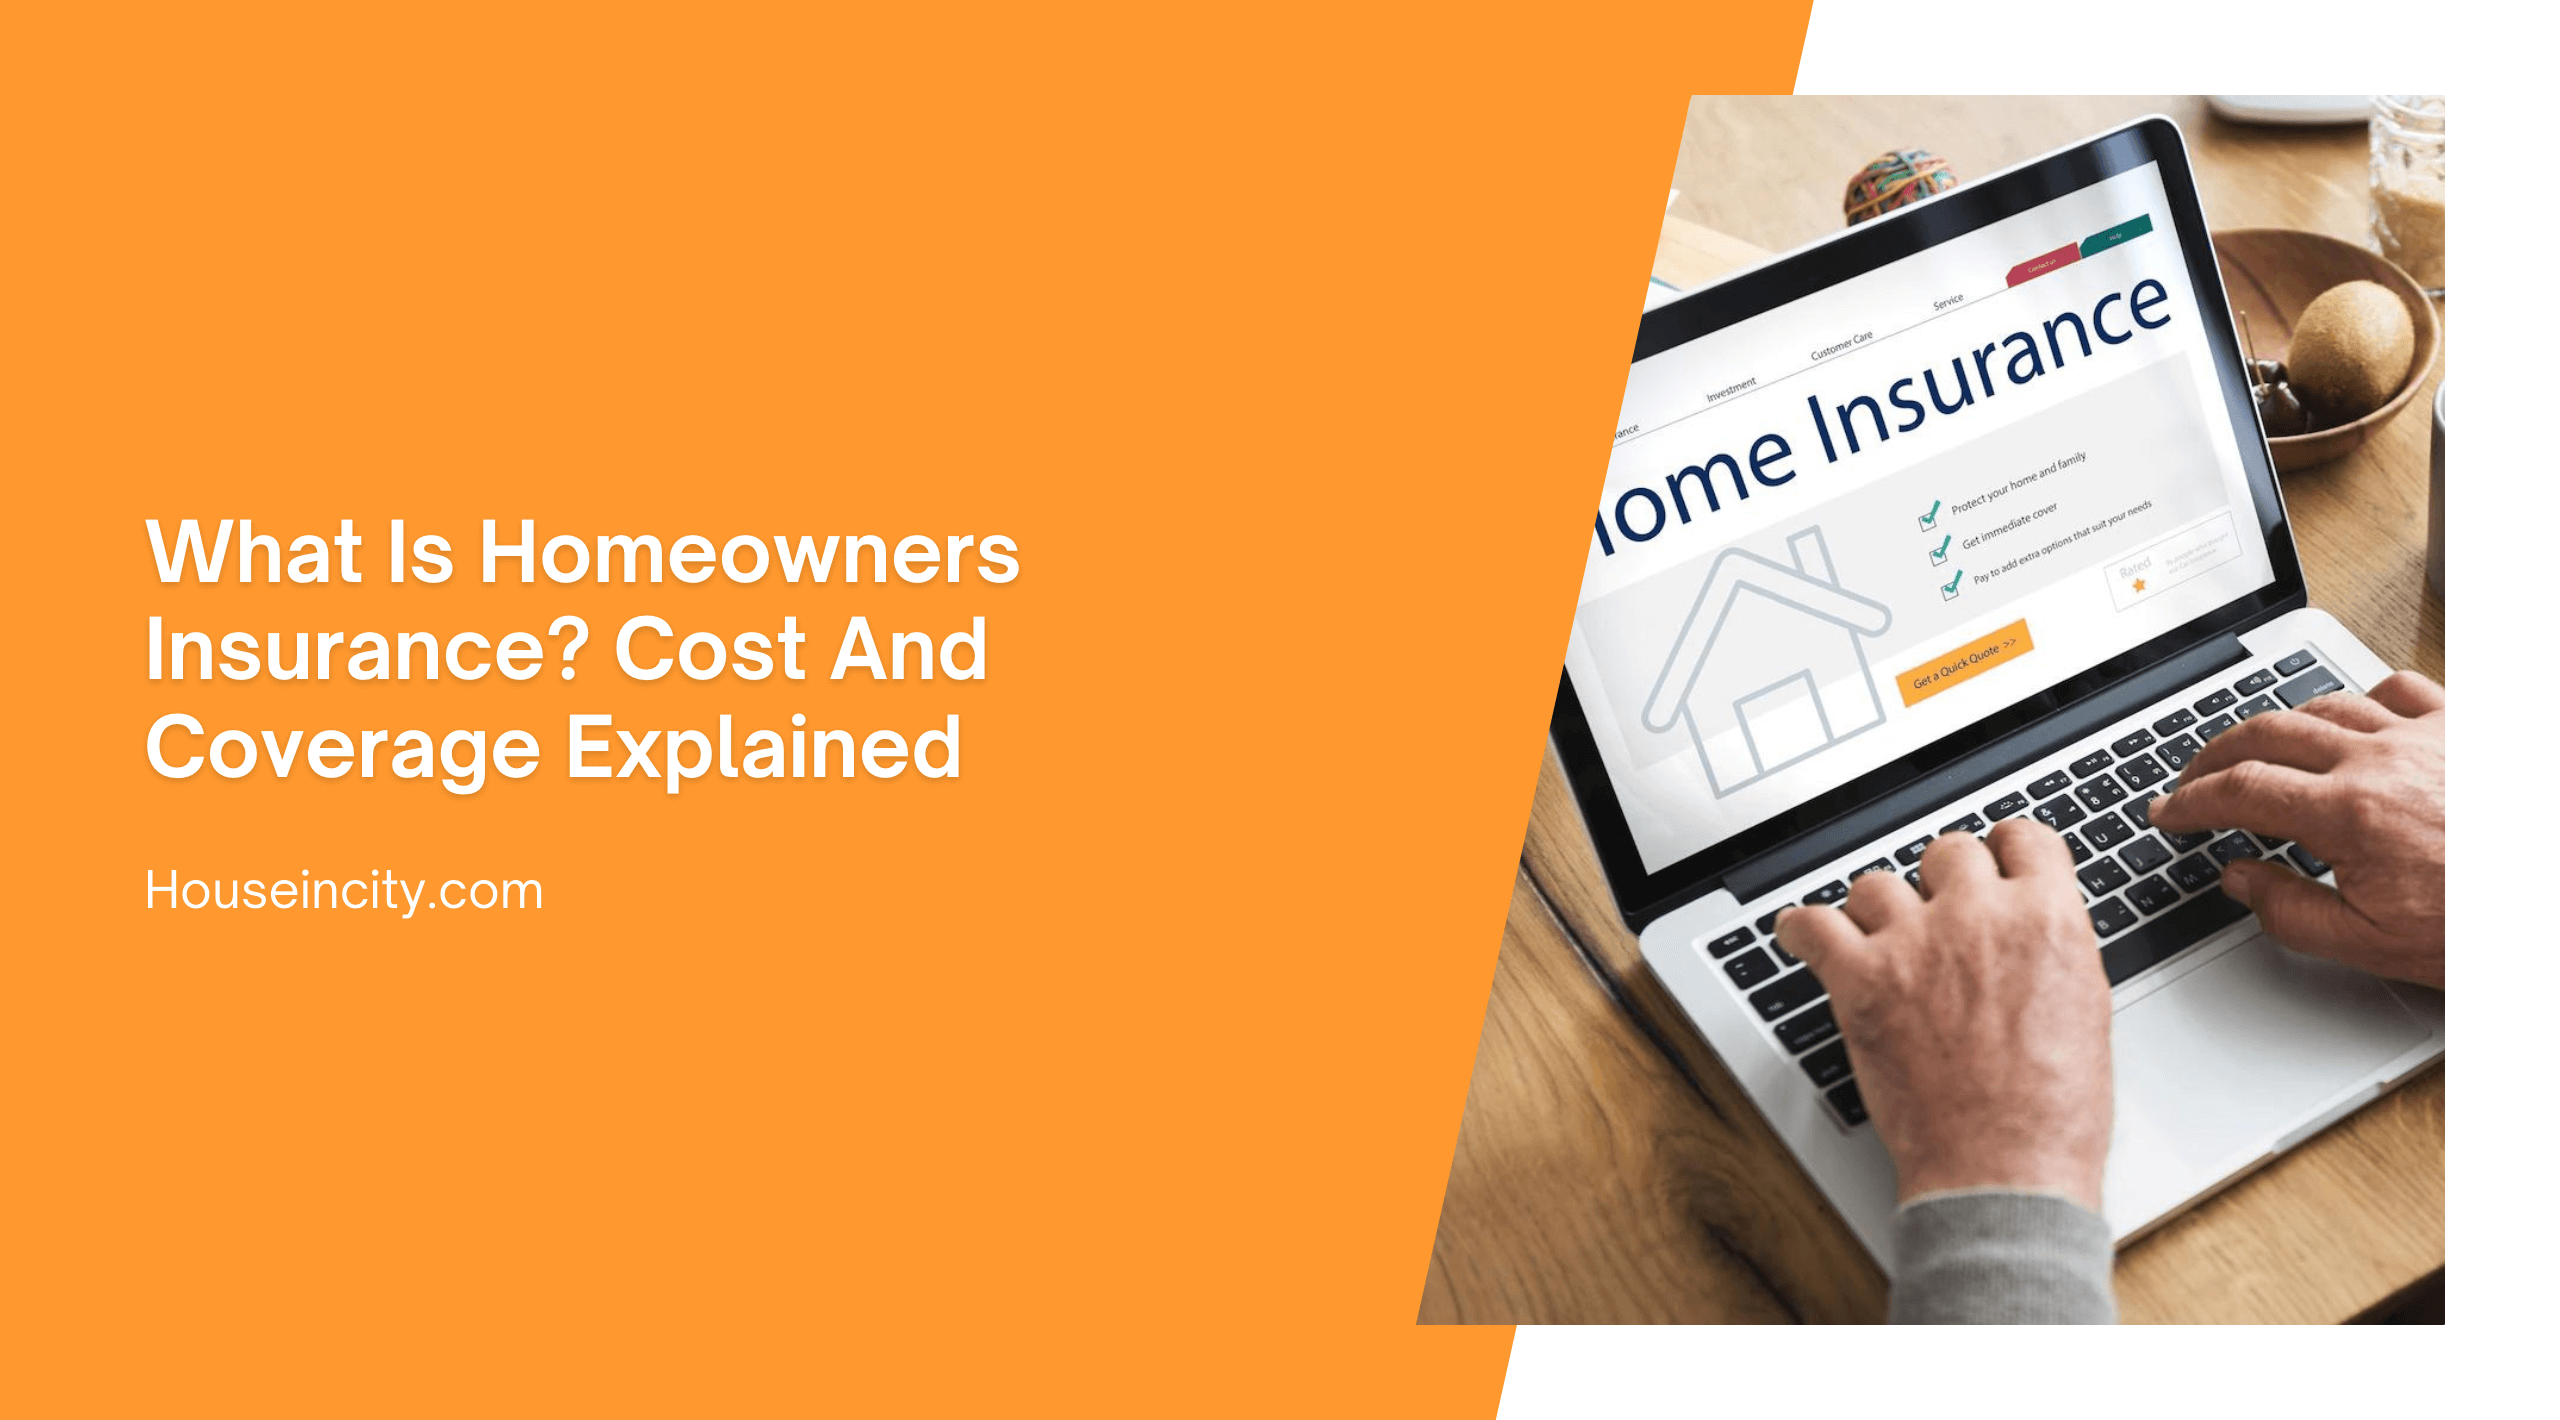 What Is Homeowners Insurance? Cost And Coverage Explained